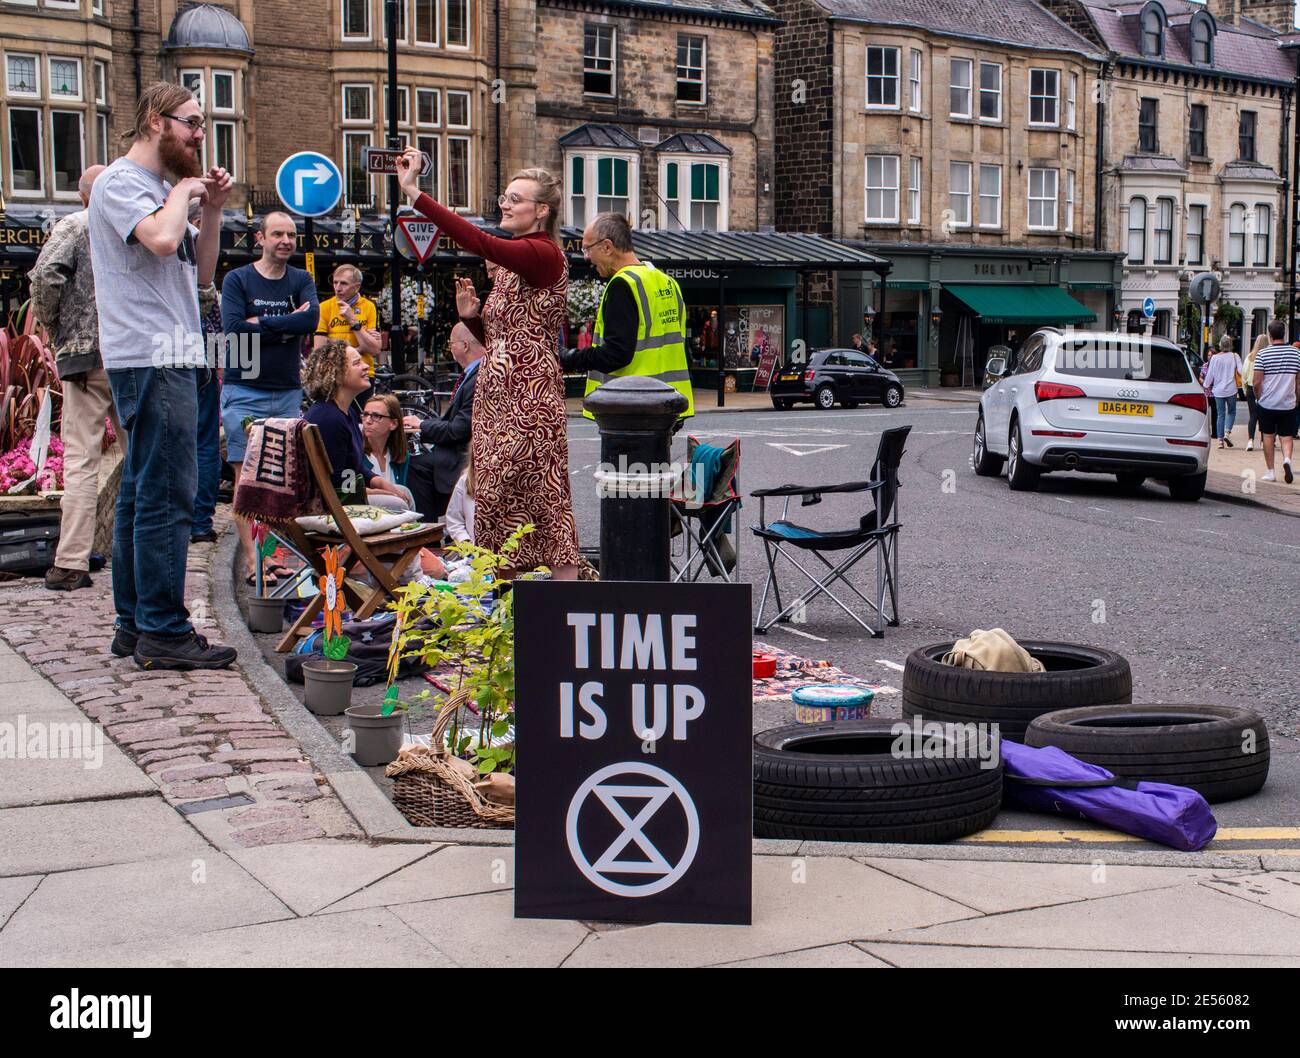 Members of Extinction Rebellion smile and interact behind a Time Is Up sign while staging a protest to reclaim public areas in the centre of Harrogate. Stock Photo